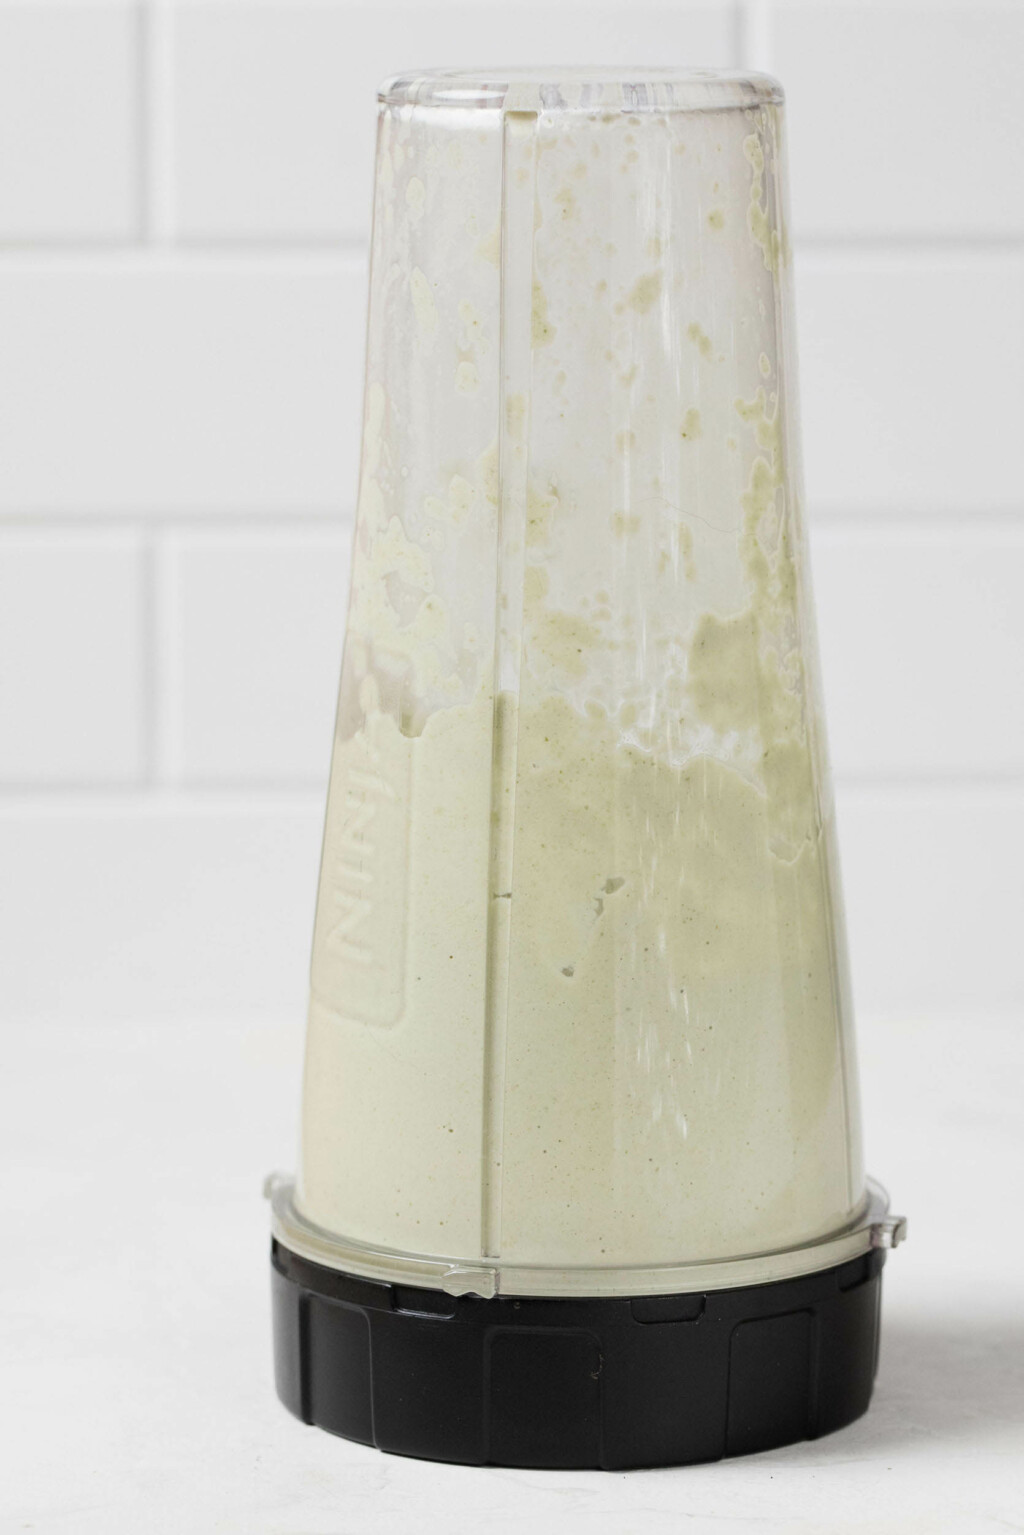 A sideways image of a personal sized blender, which is being used to whip up a pale green pumpkin seed cream.